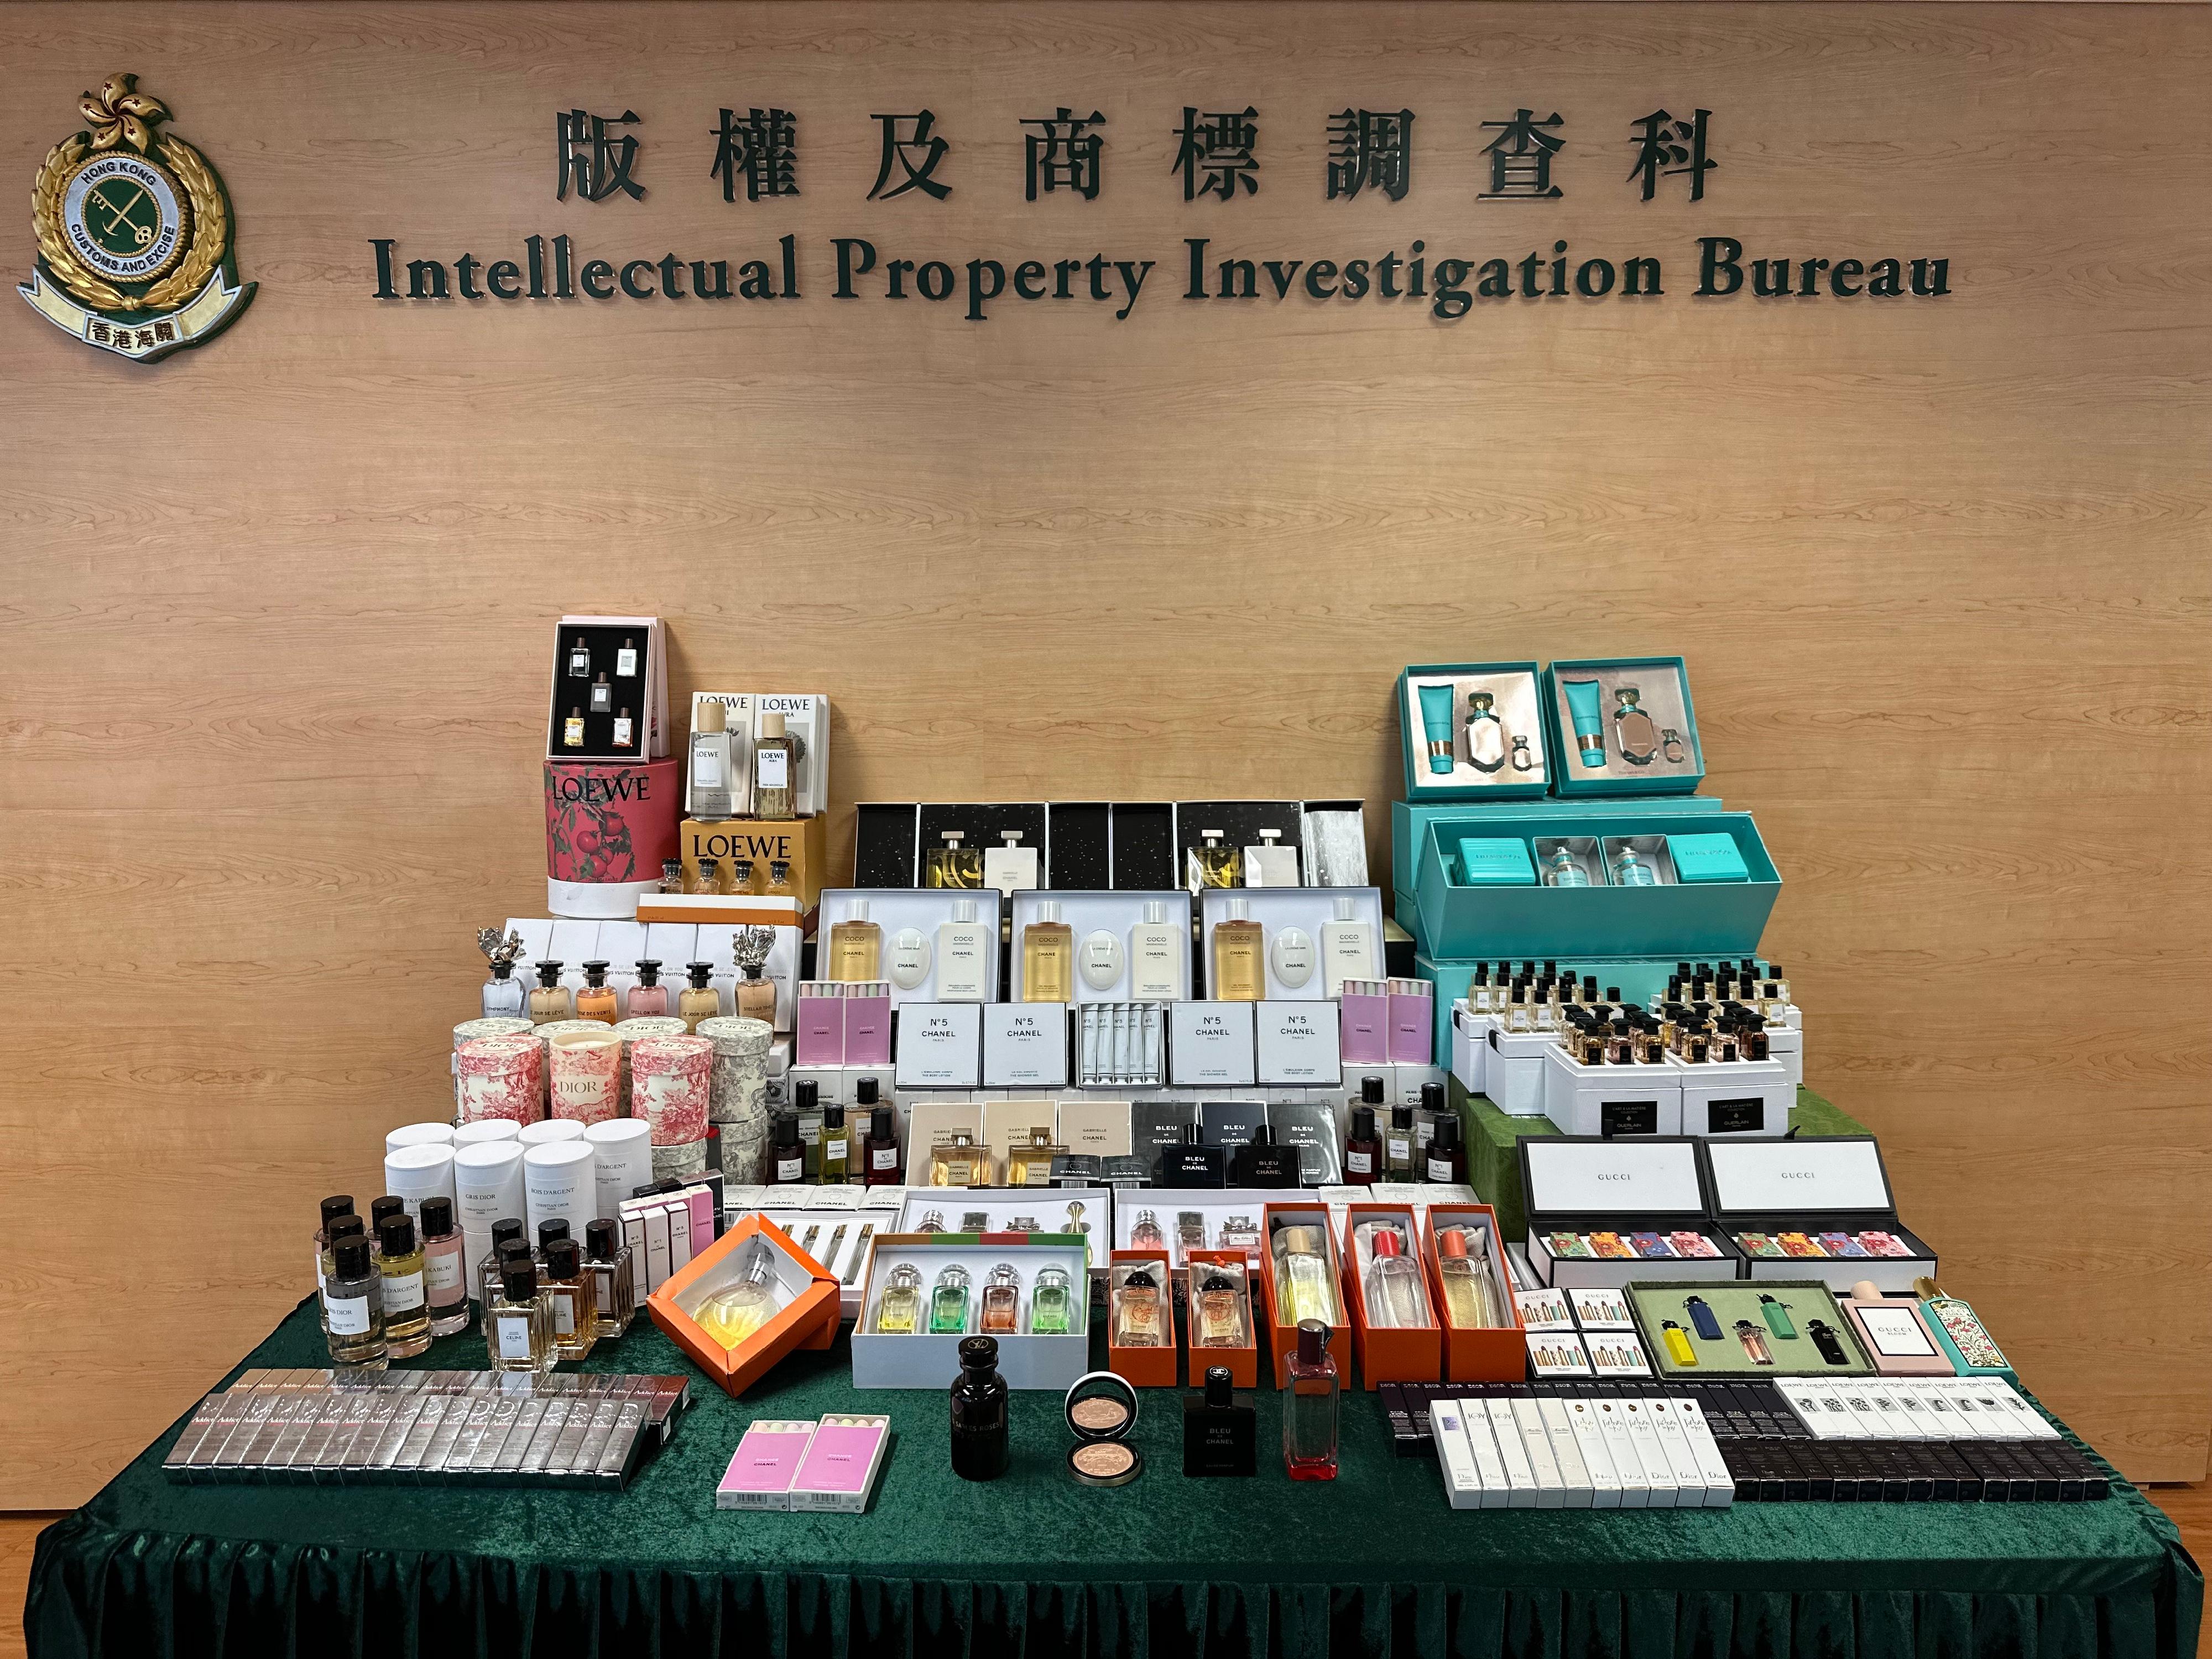 Hong Kong Customs yesterday (June 6) detected a case involving online sale of counterfeit perfume and cosmetics, and seized about 1 500 items of suspected counterfeit products with an estimated market value of about $680,000. Photo shows some of the suspected counterfeit products seized.